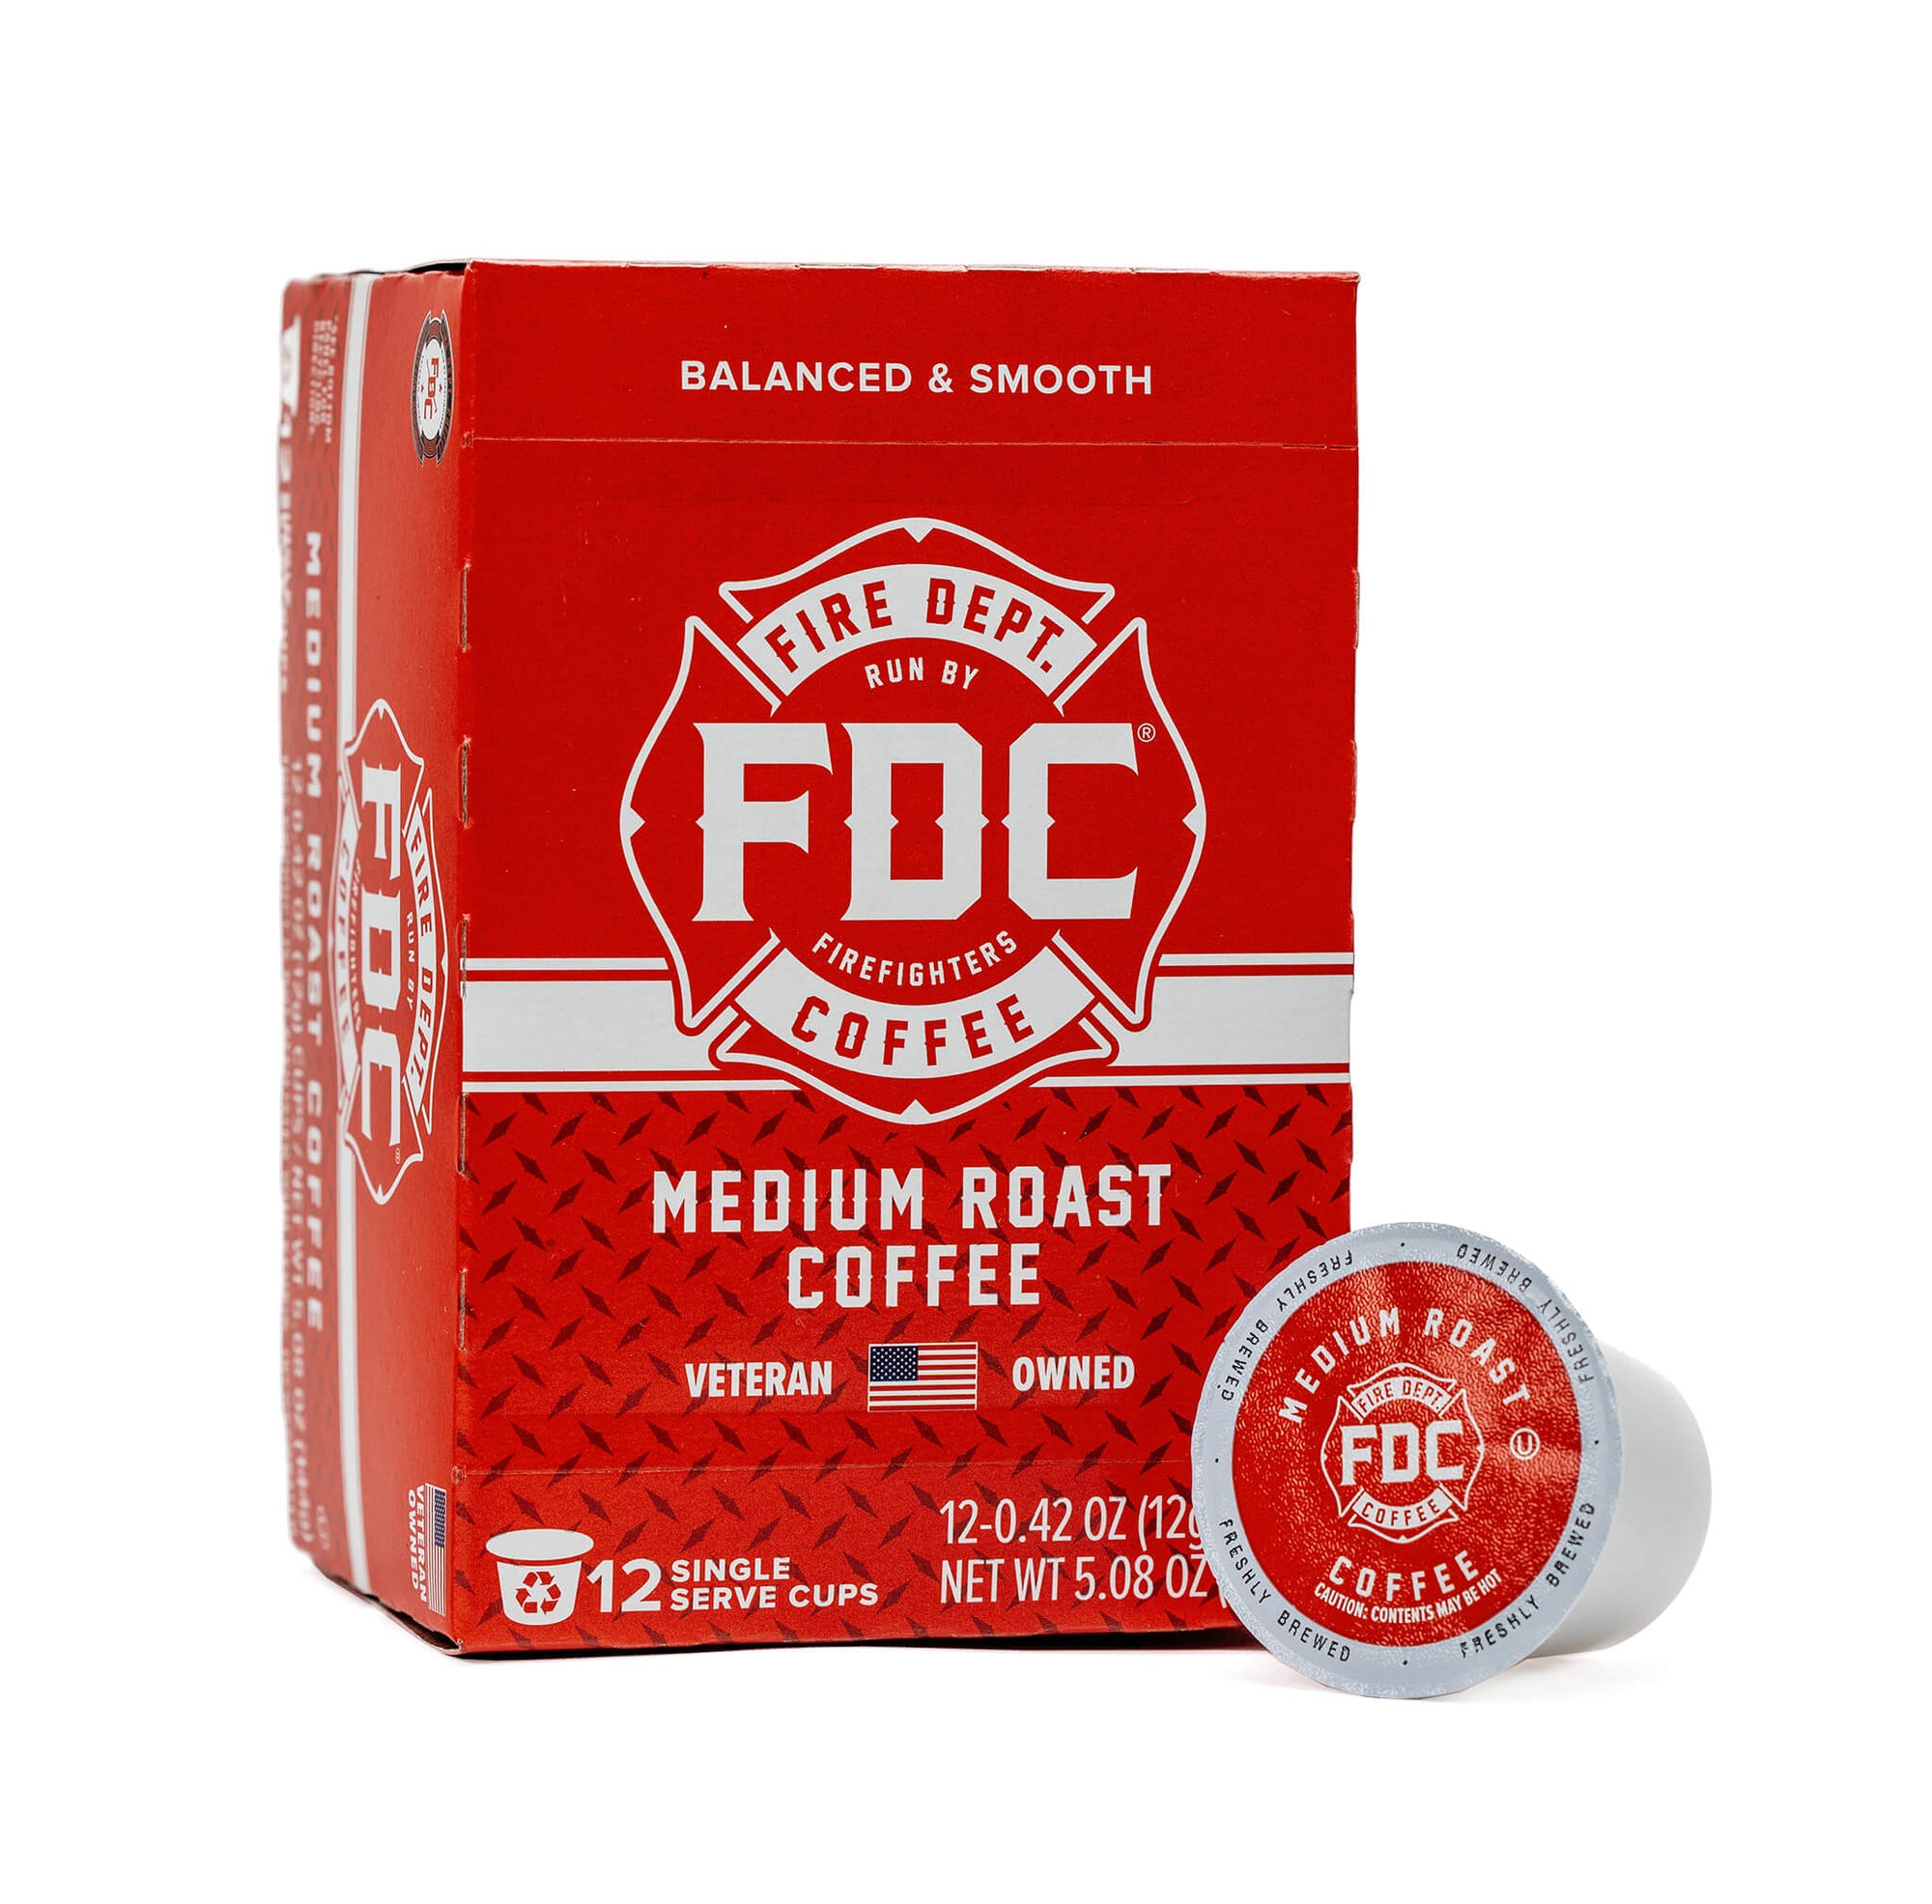 A box of 12 of Fire Department Coffee's Medium Roast Coffee Pods